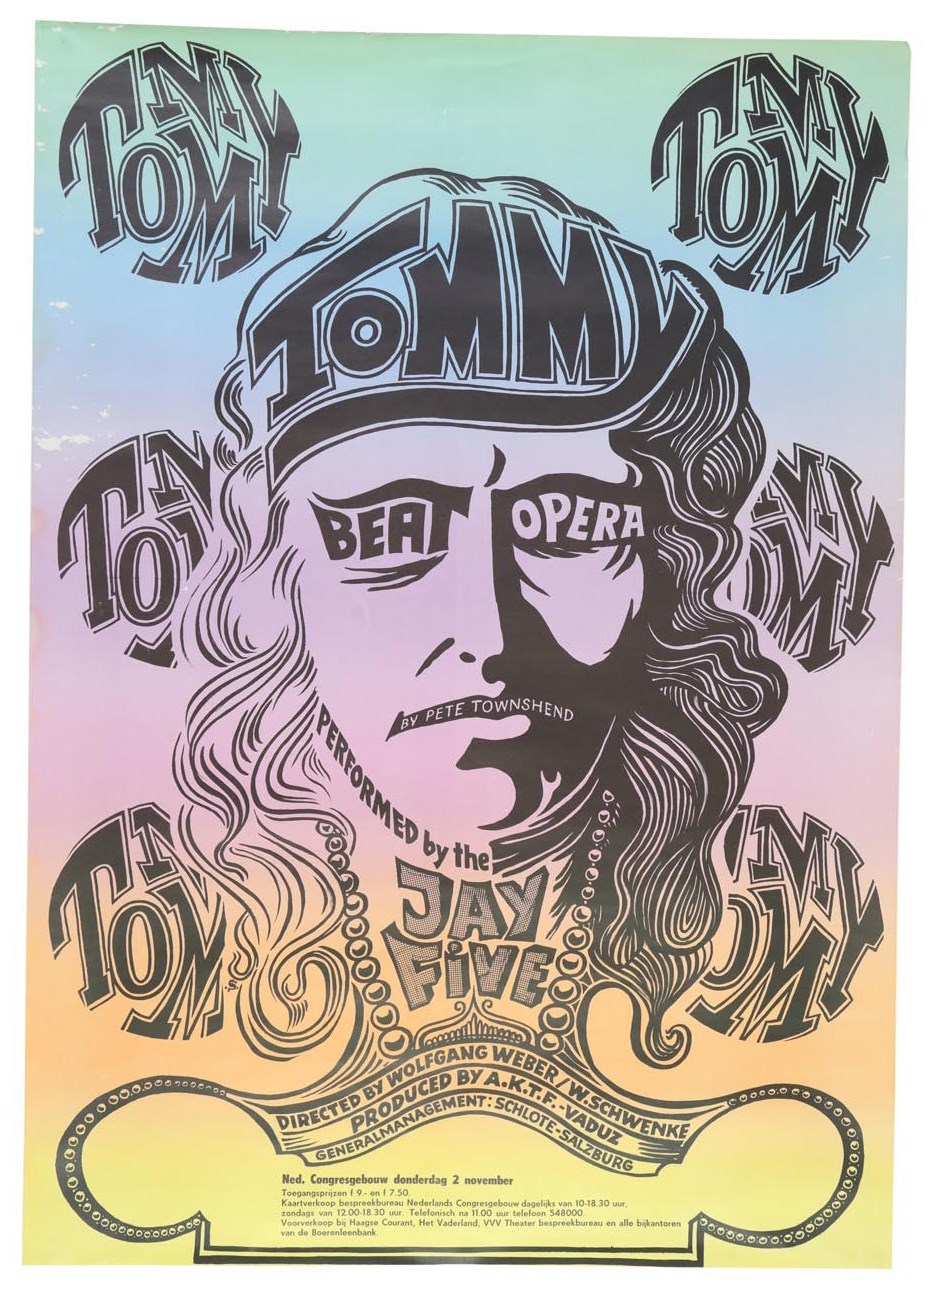 - 1975 “Tommy” by Pete Townsend Concert Poster